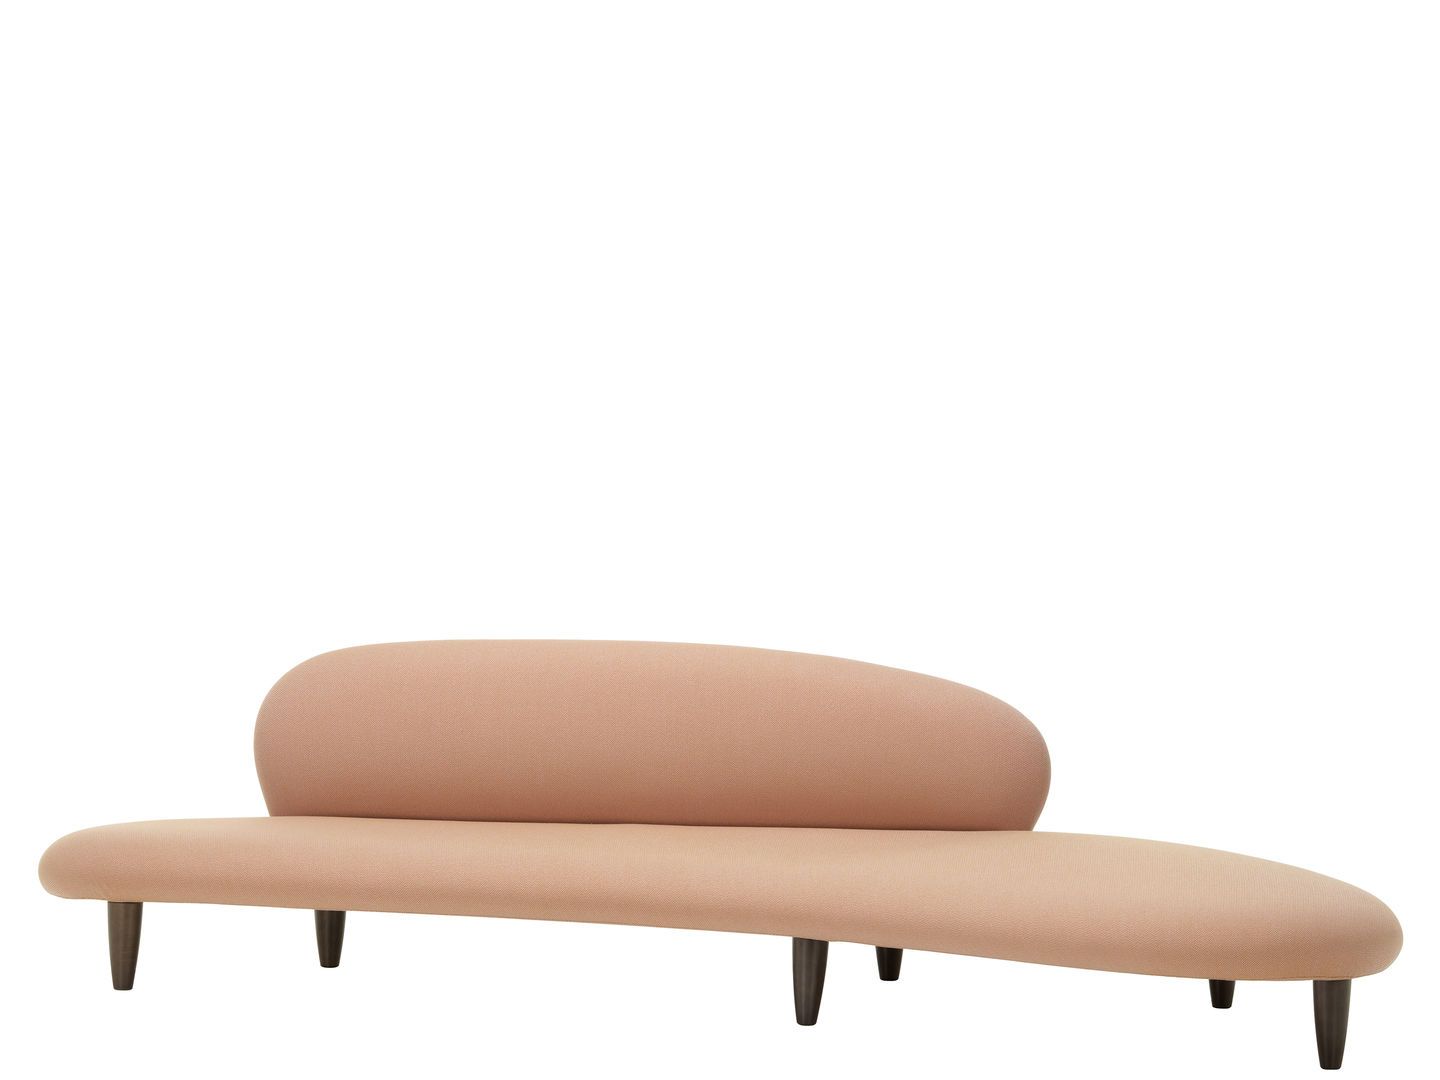 Vitra Freeform Sofa - Modern and Comfortable Seating for Home or Office